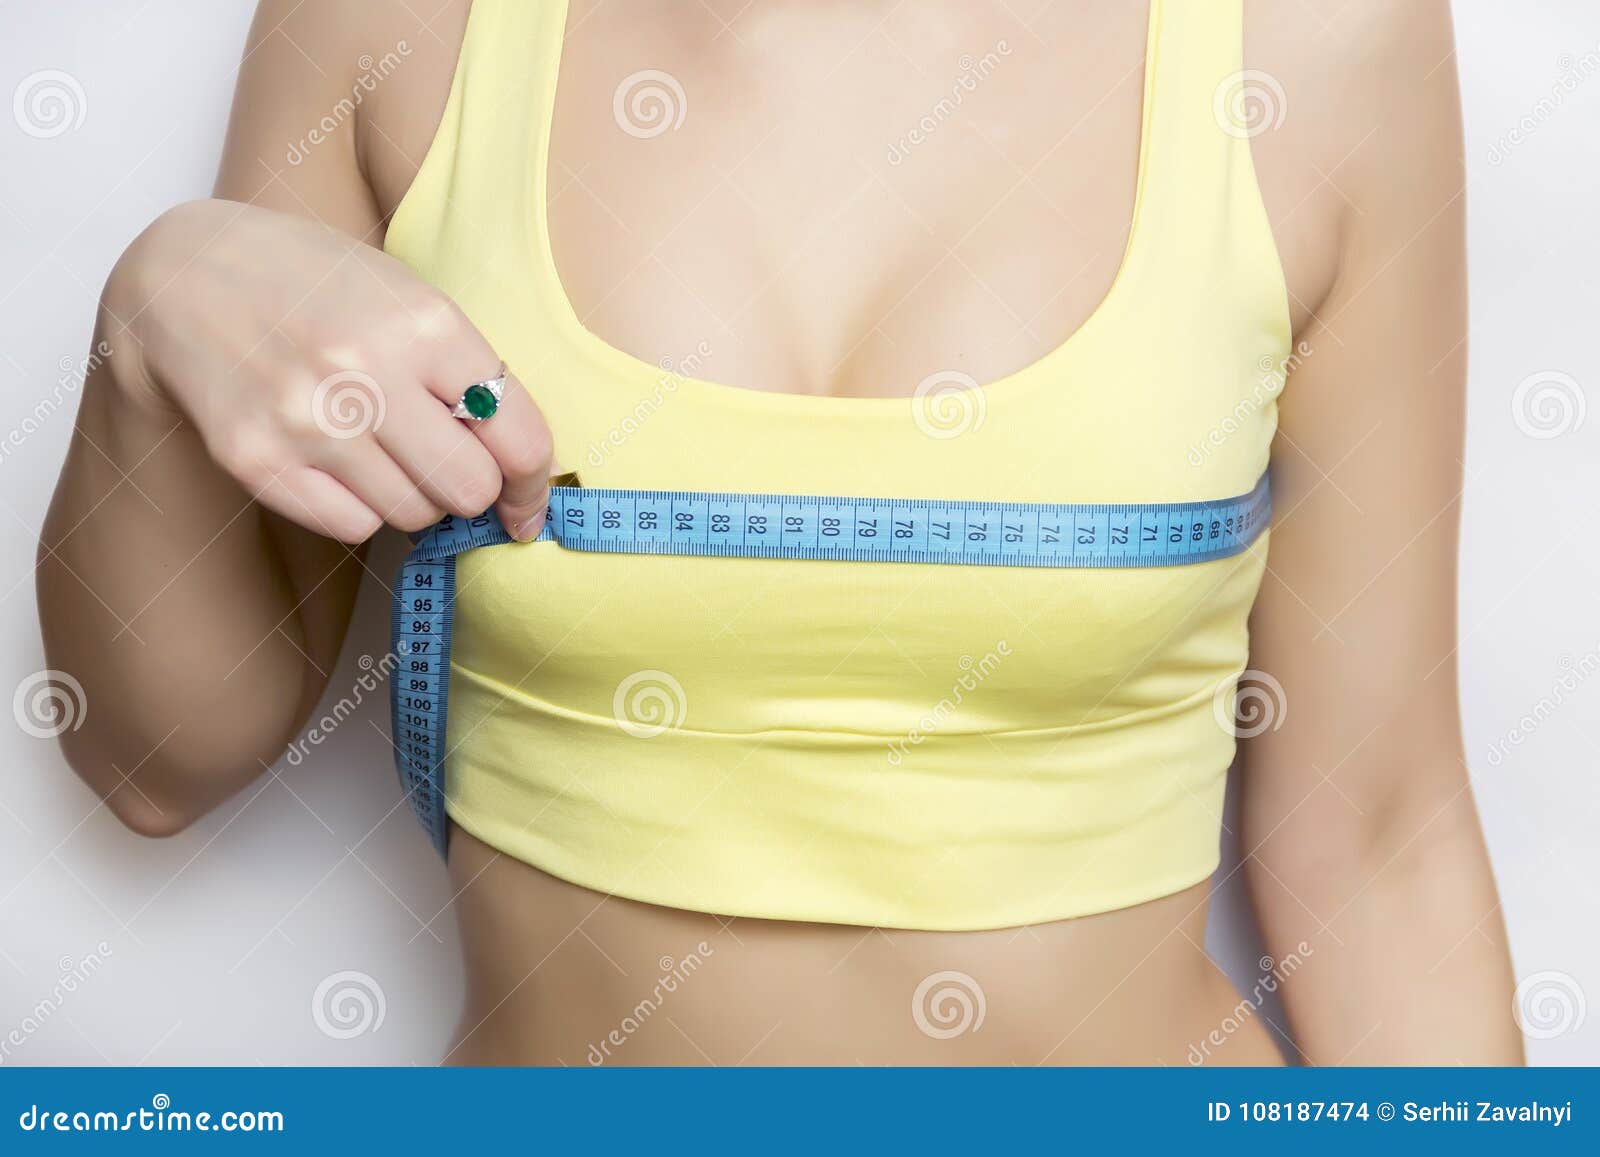 Breast measer how to